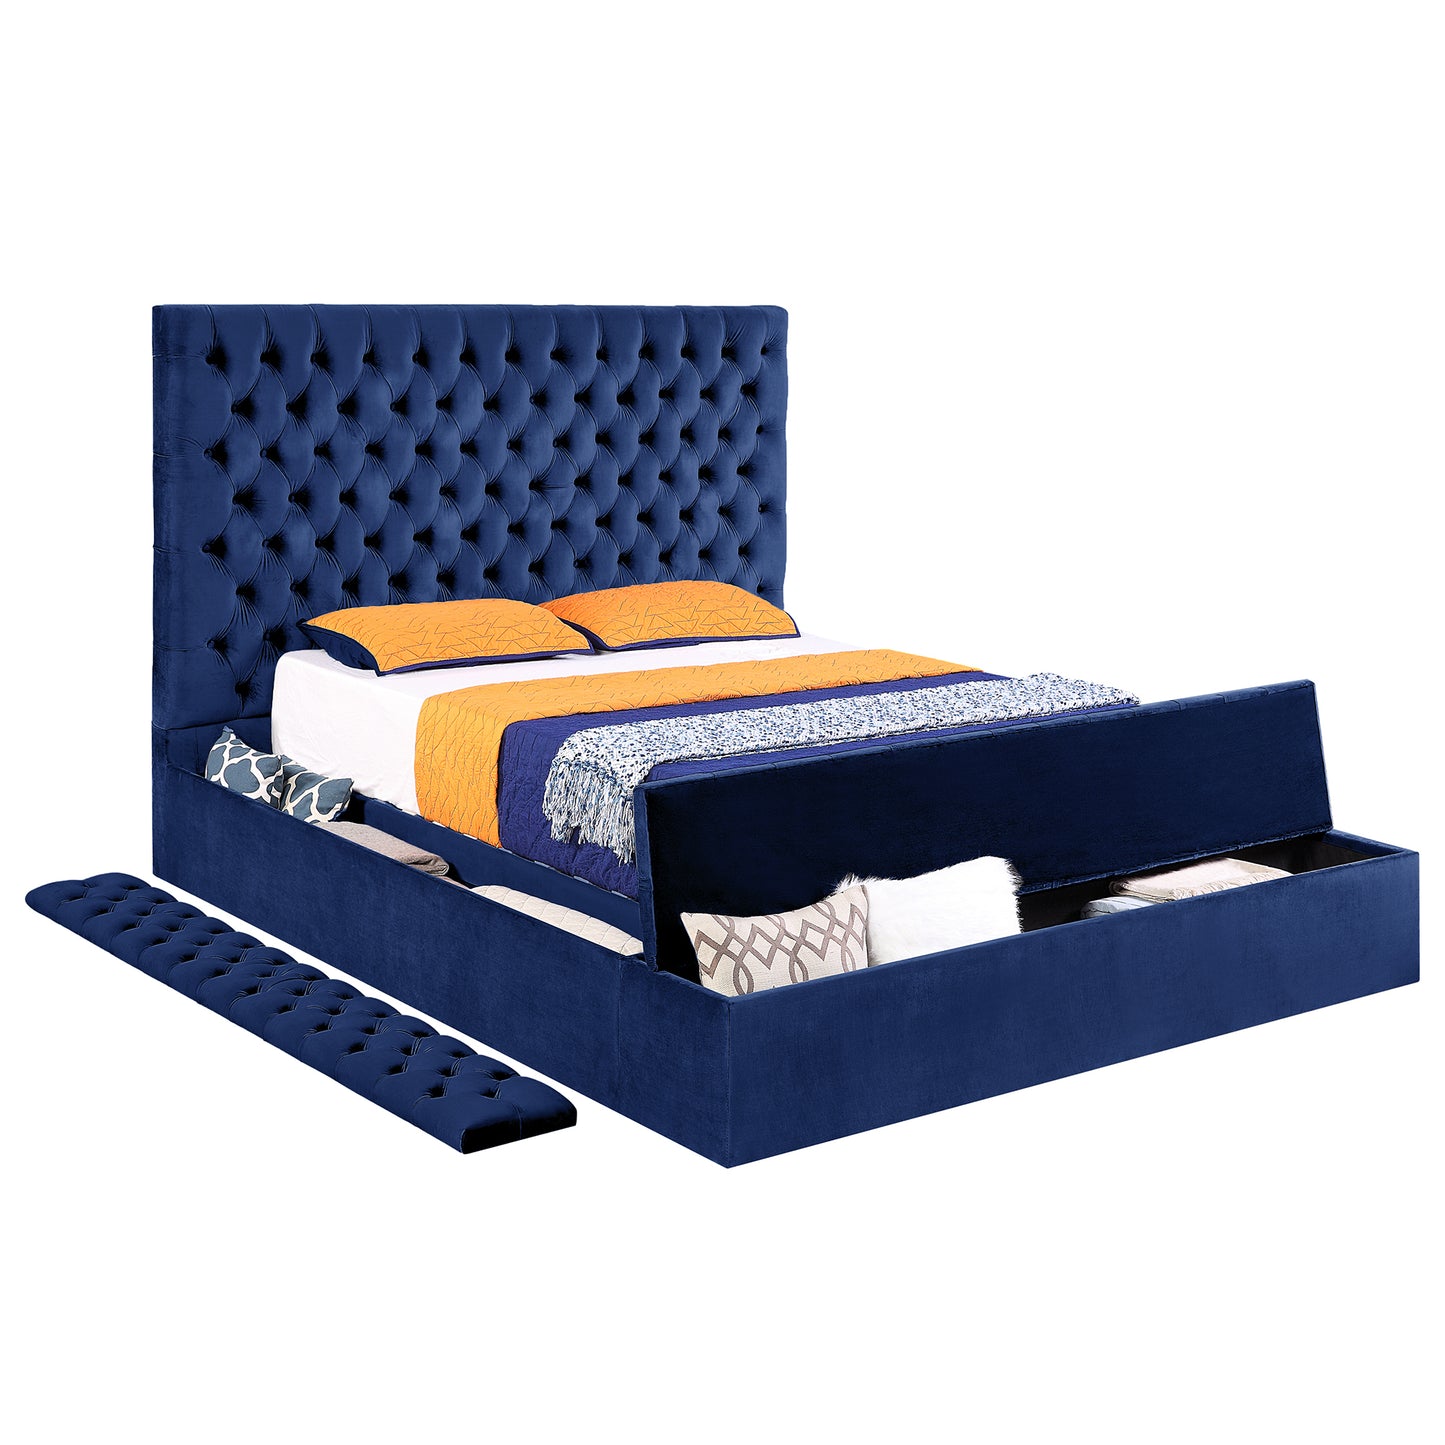 Contemporary Velvet Upholstered Bed with Storage Locker, Deep Button Tufting, Solid Wood Frame, High-density Foam, King Size